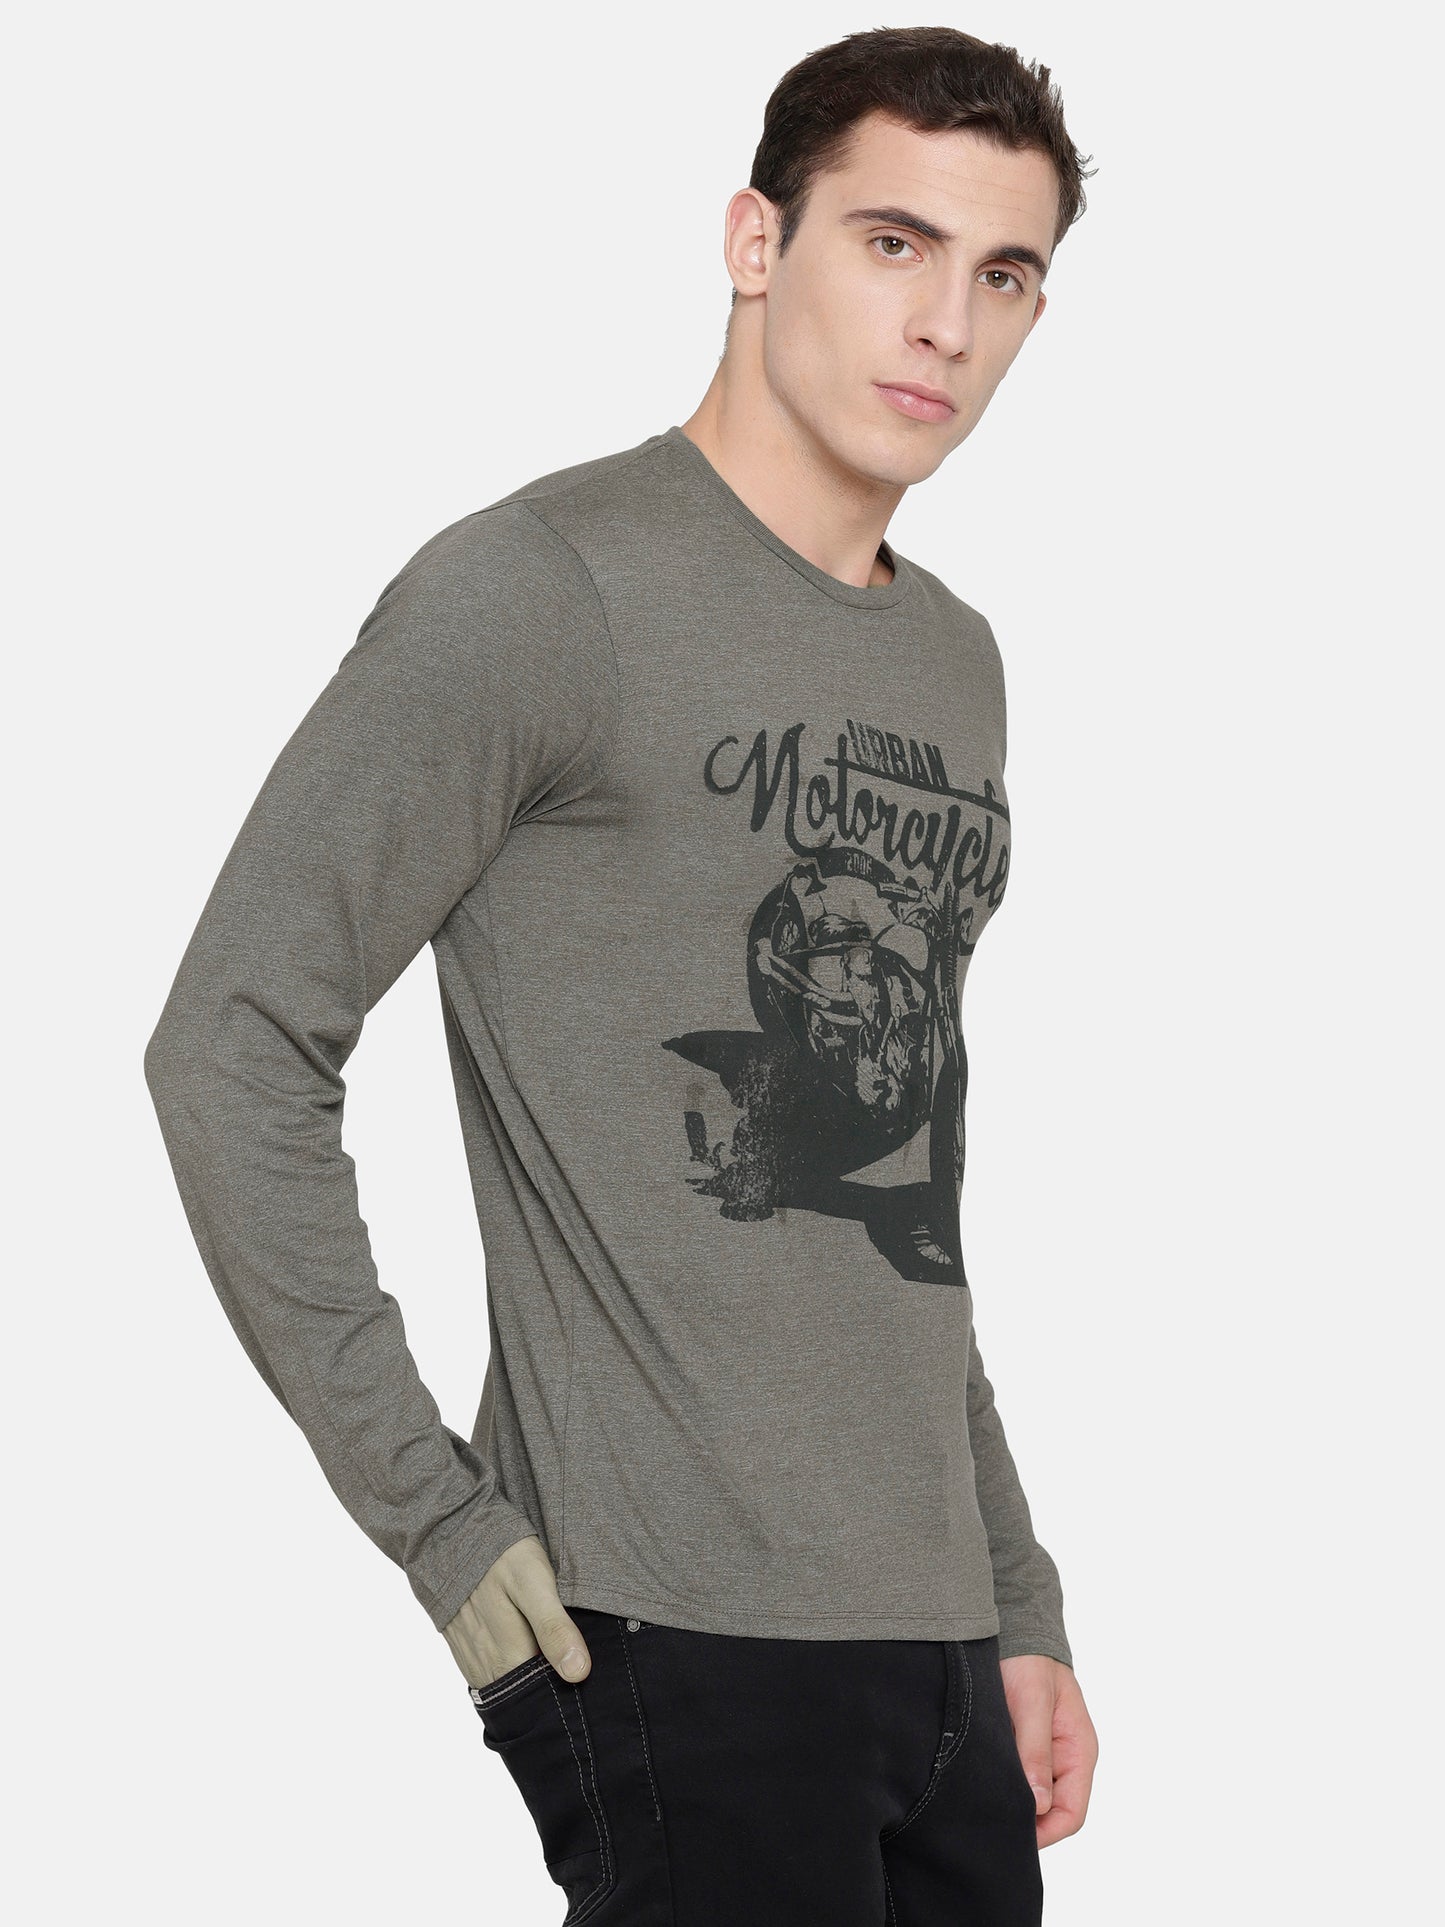 Army Green Chest Printed T-Shirt -Full Sleeve